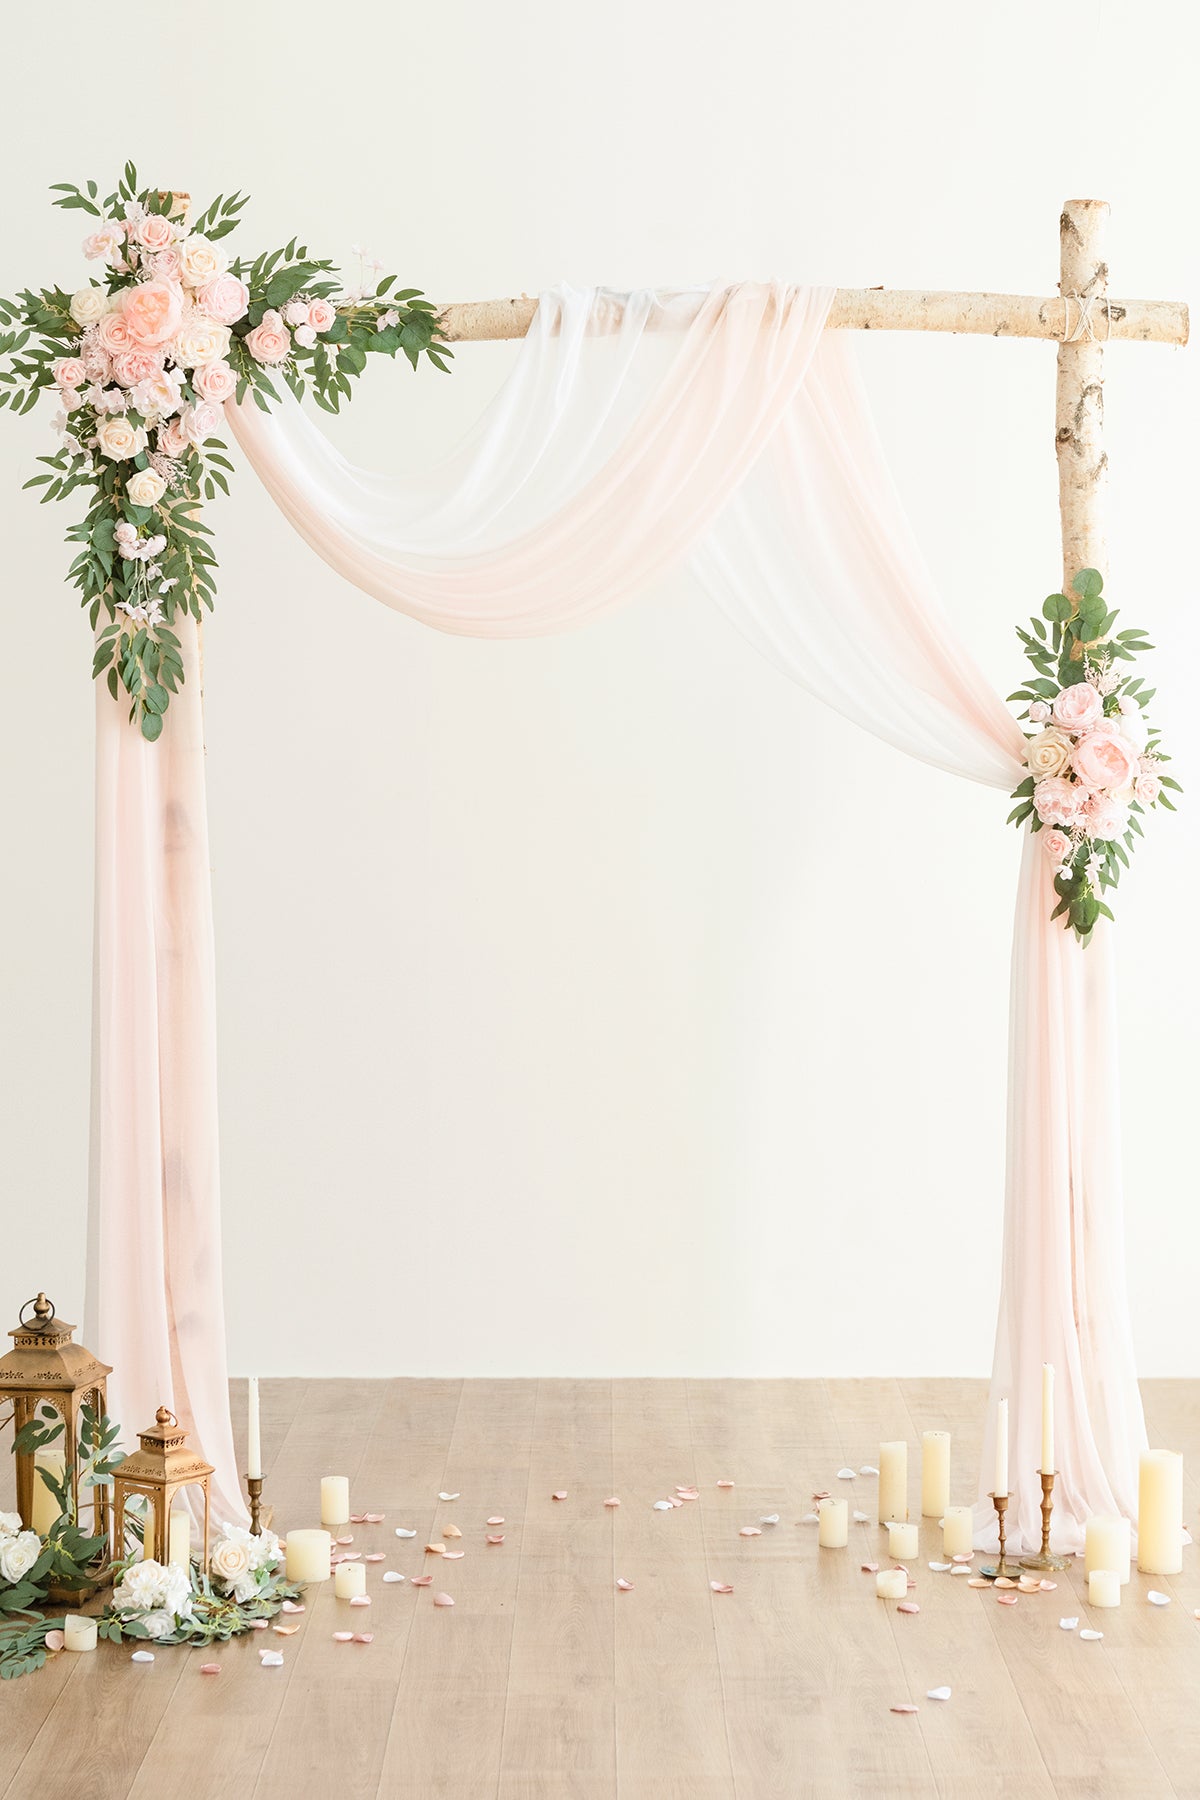 Flower Arch Decor with Drapes in Blush & Cream | Clearance